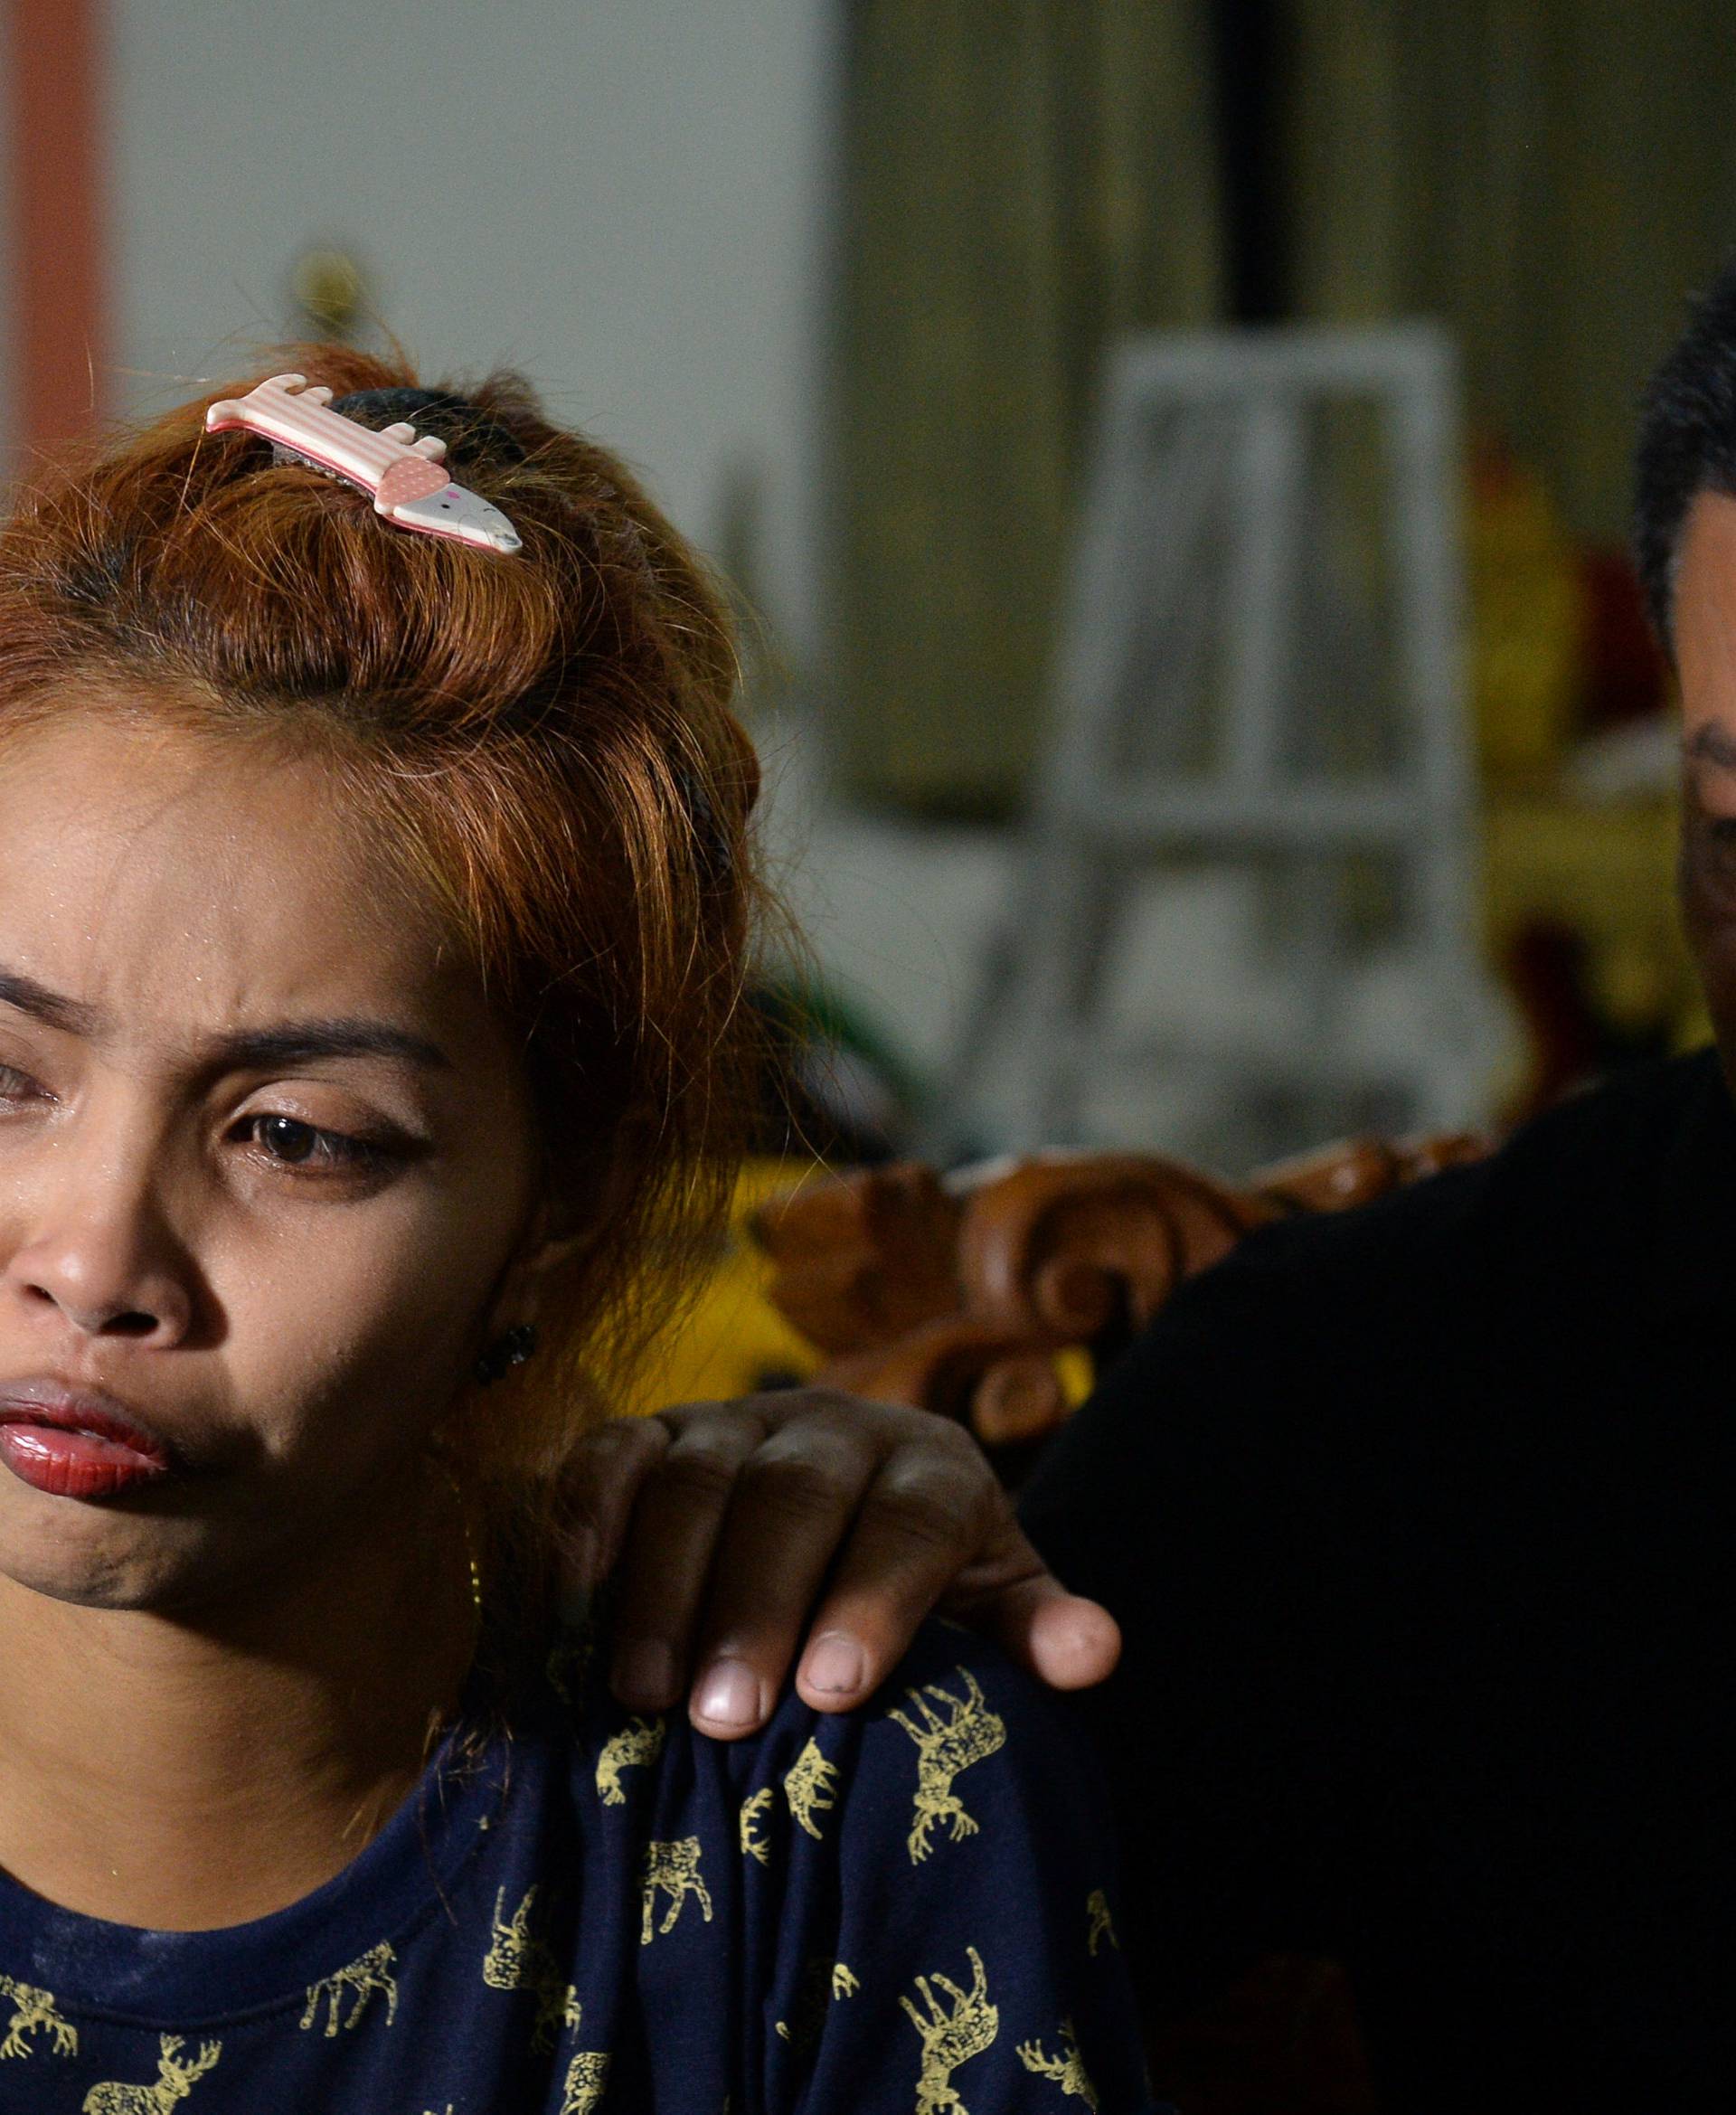 Jiranuch Trirat is comforted her by father at a temple in Phuket